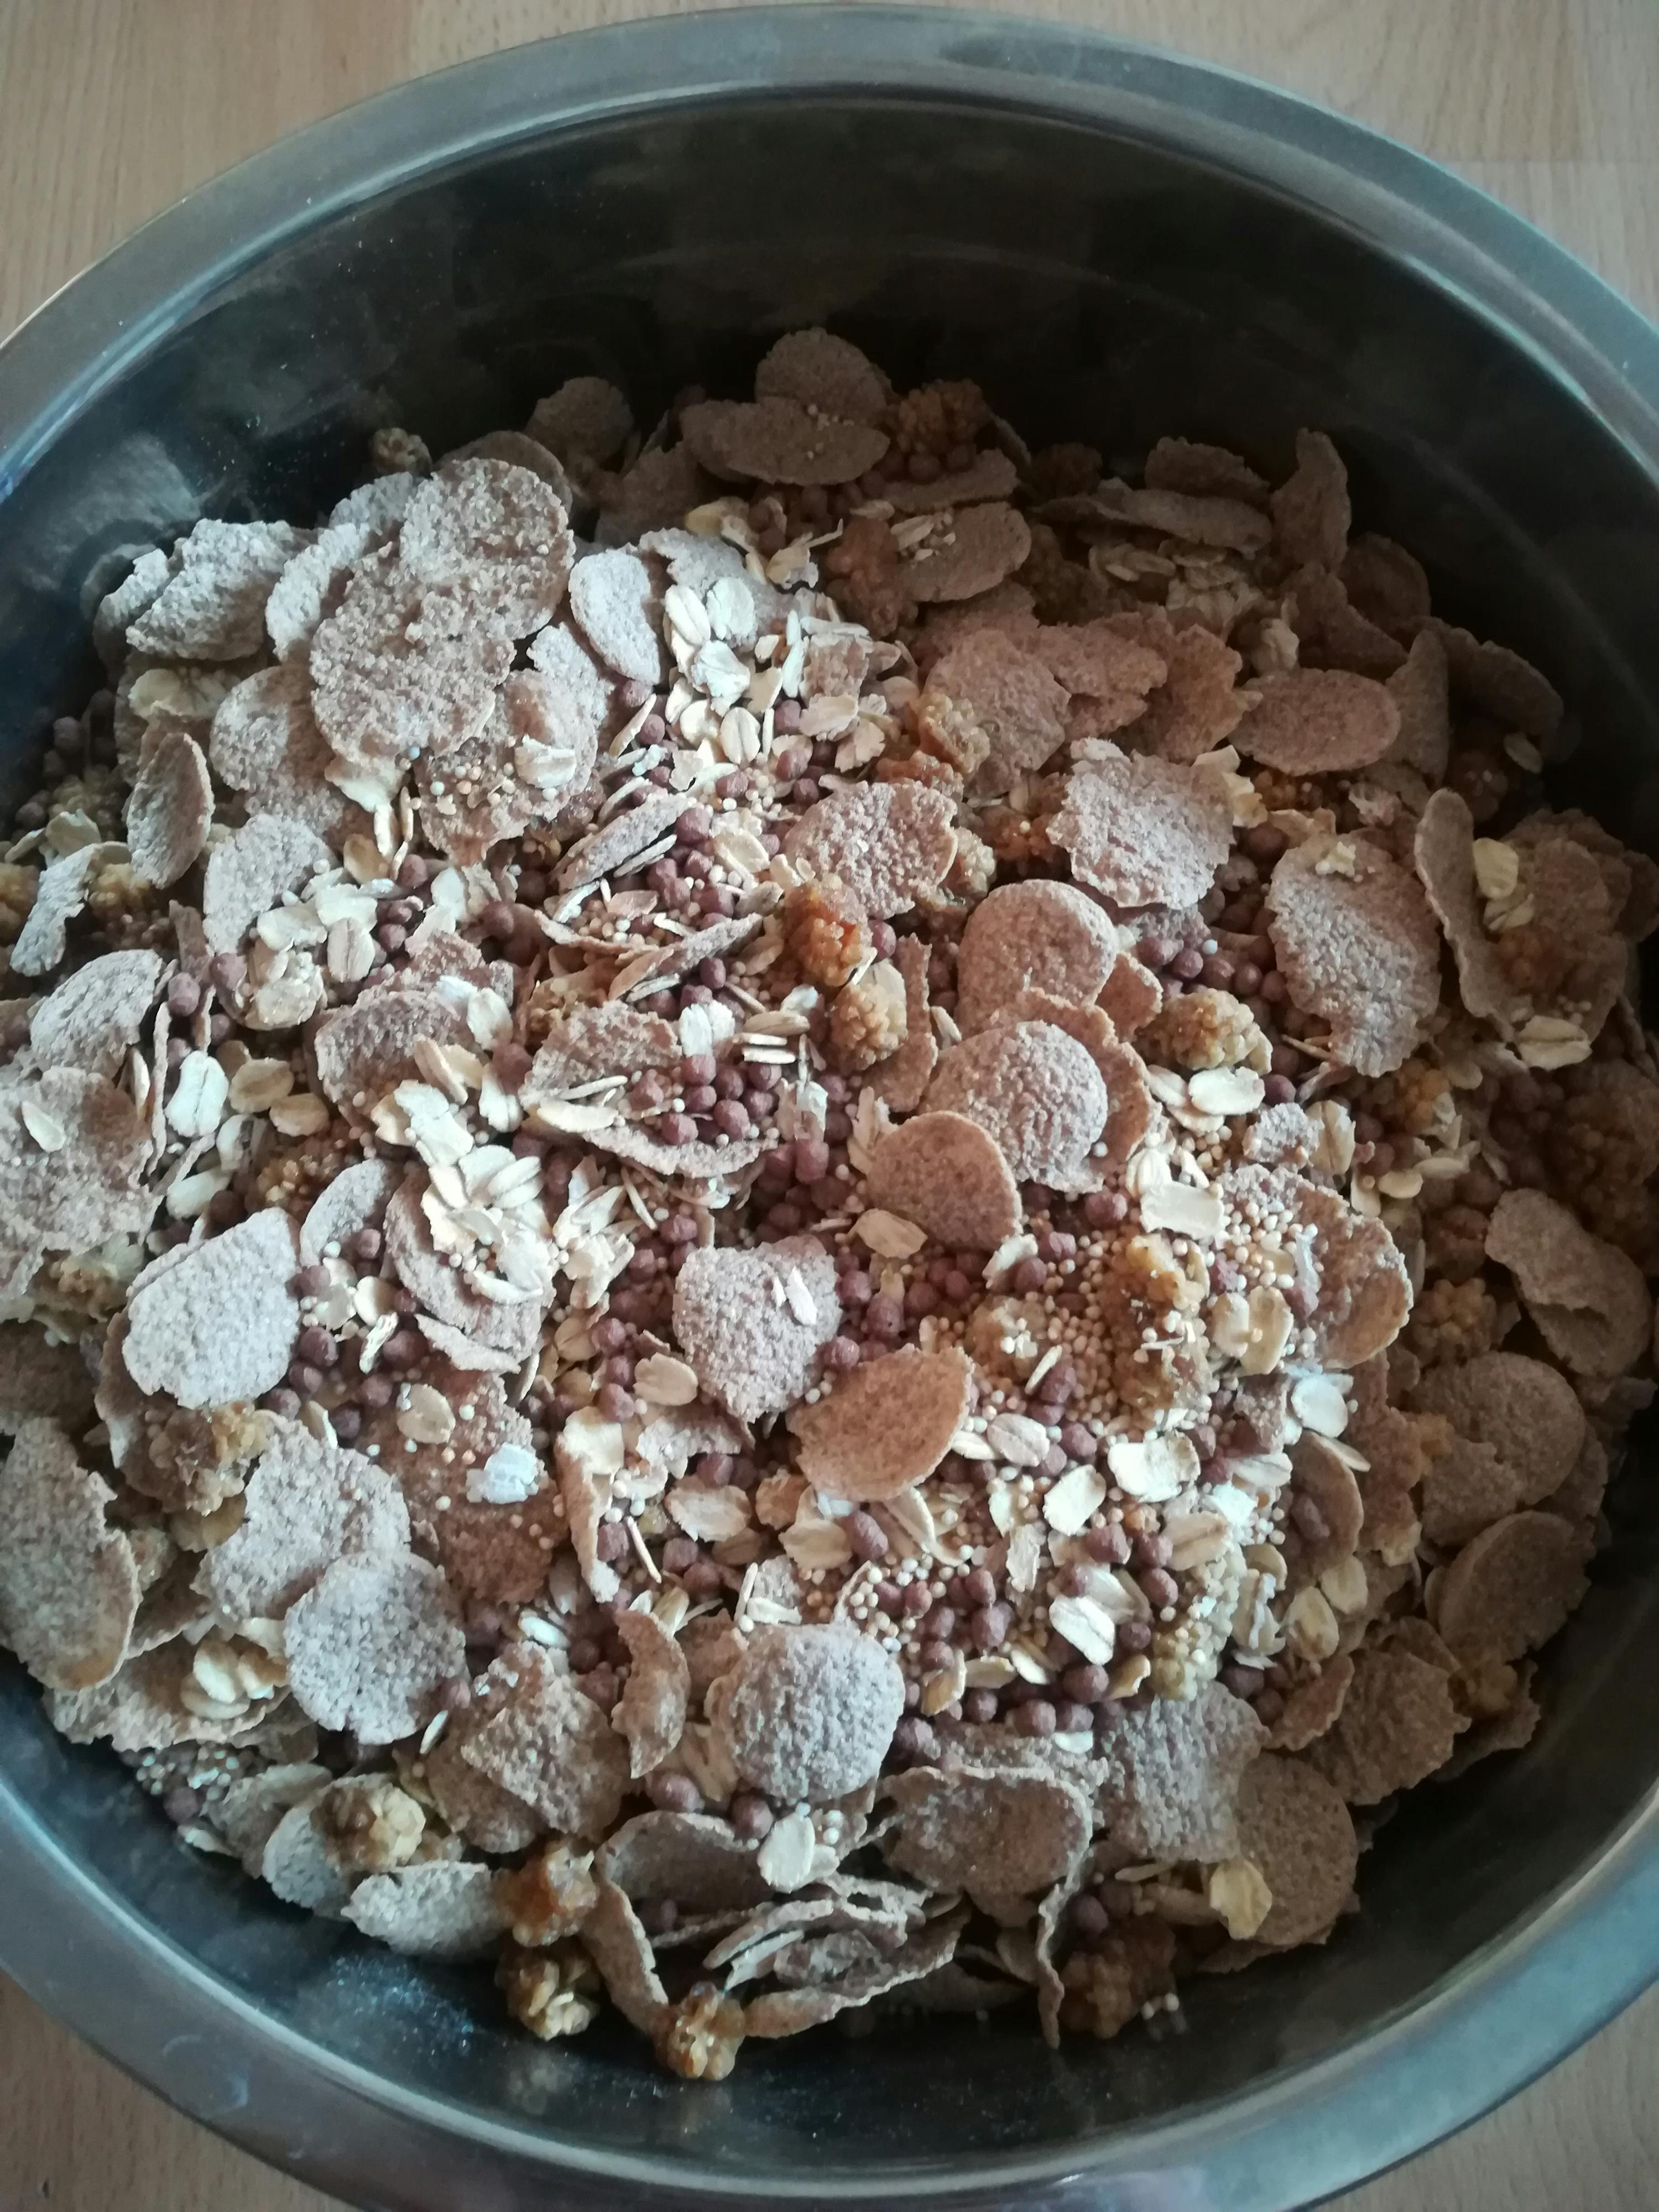 Photos and pictures of Soy products, Soja Protein Crispies Kakao (KoRo) -  Fddb